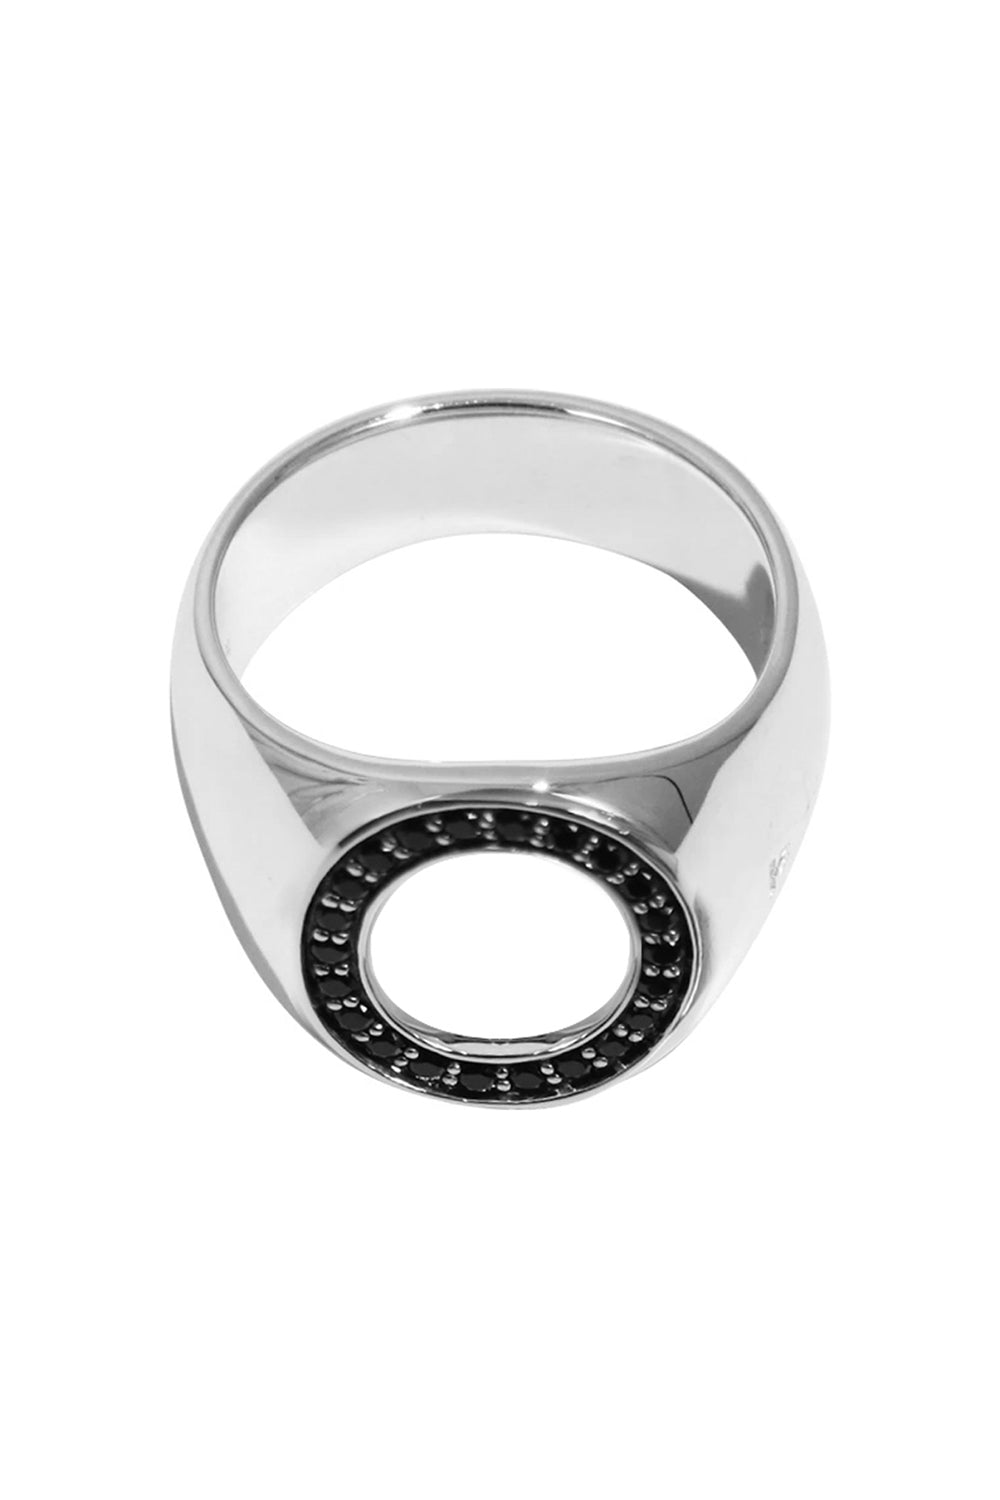 TOM WOOD OPEN OVAL RING BLACK SPINEL SILVER NEW SEASON PARLOUR X